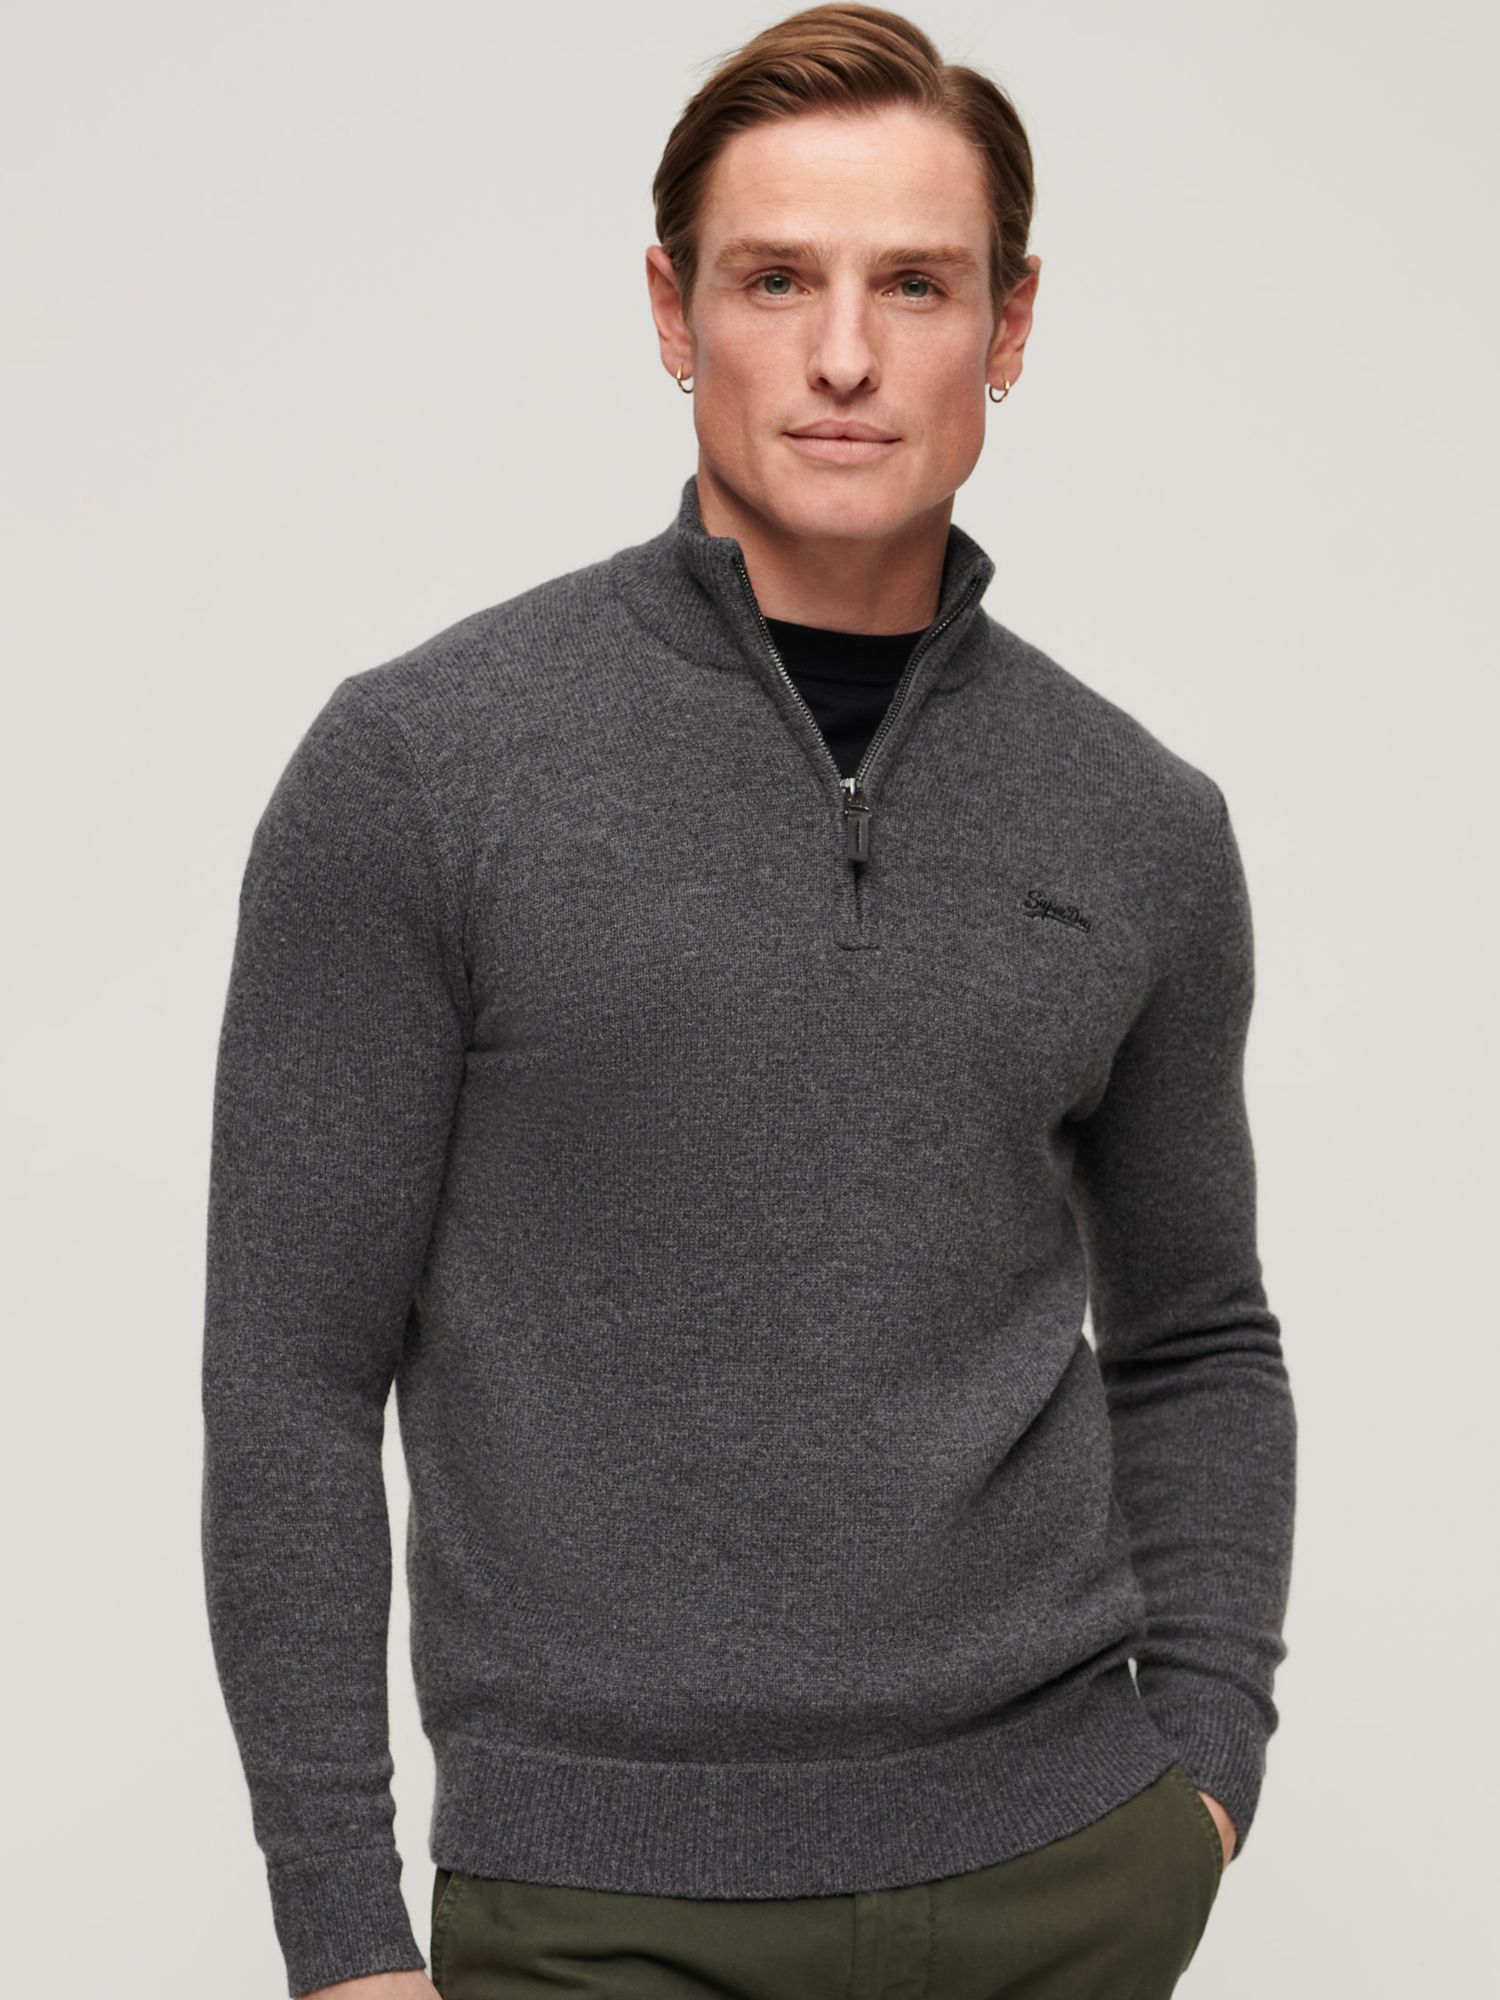 Superdry Essential Embroidered Knit Henley Jumper, Gull Grey Marl, S